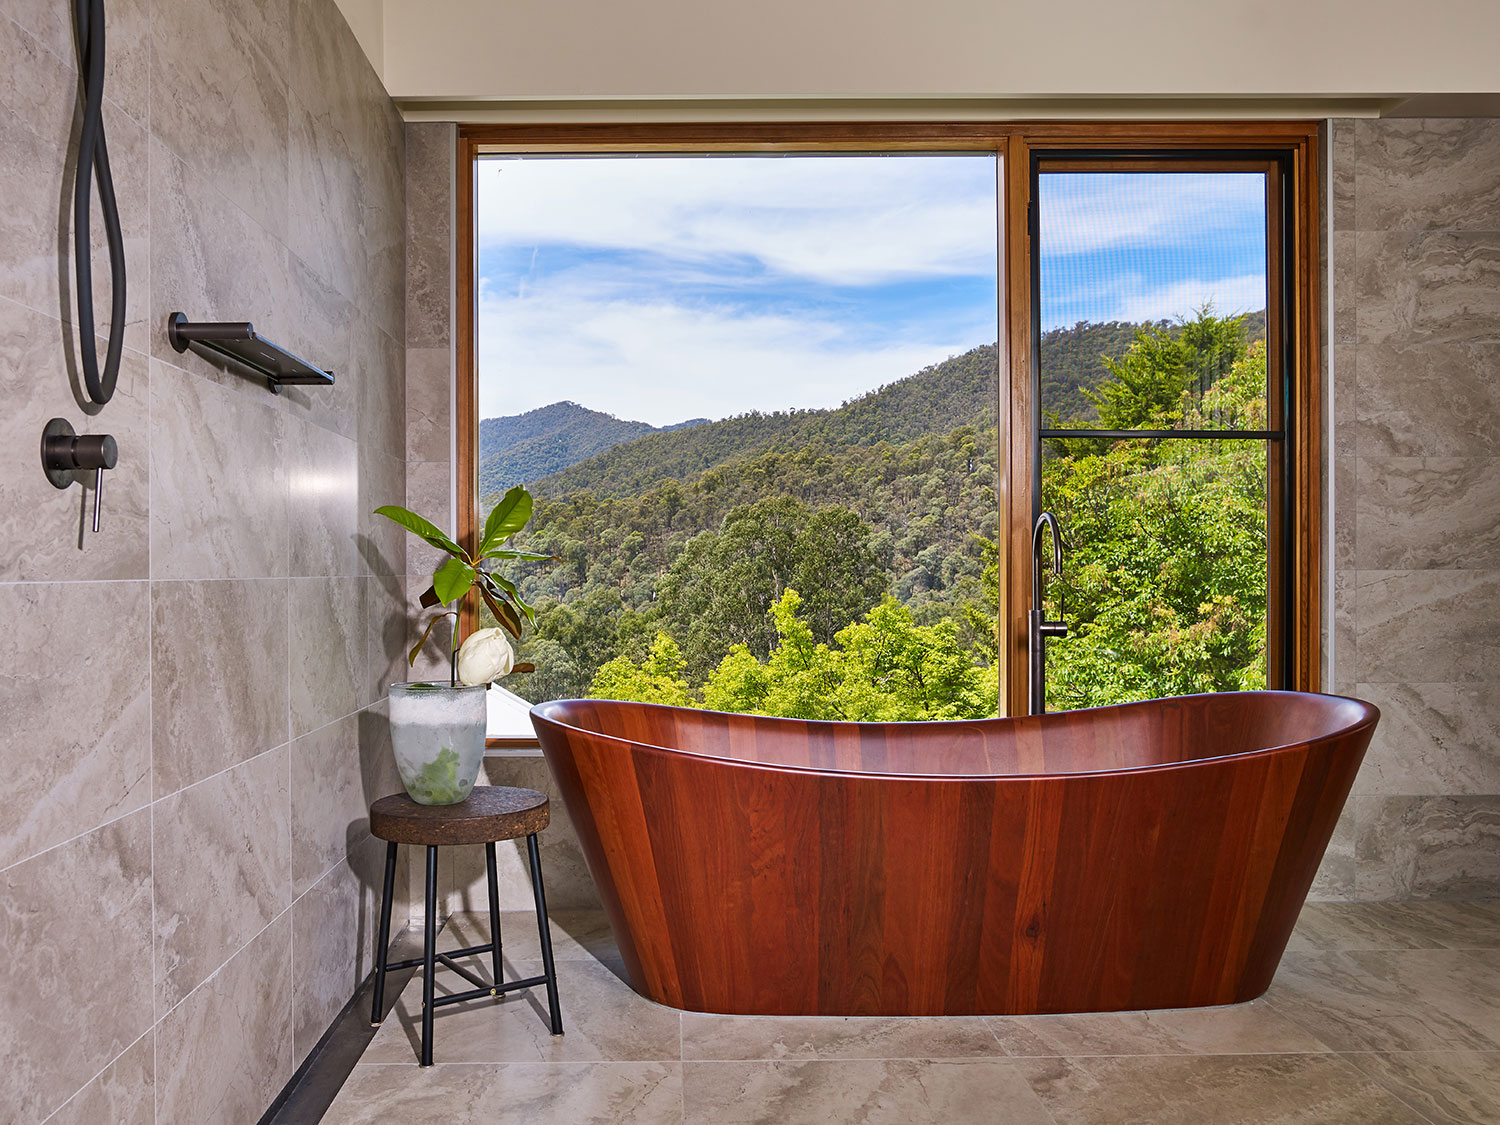 A beautifully polished red gum soaker bath faces a large glass-panelled window